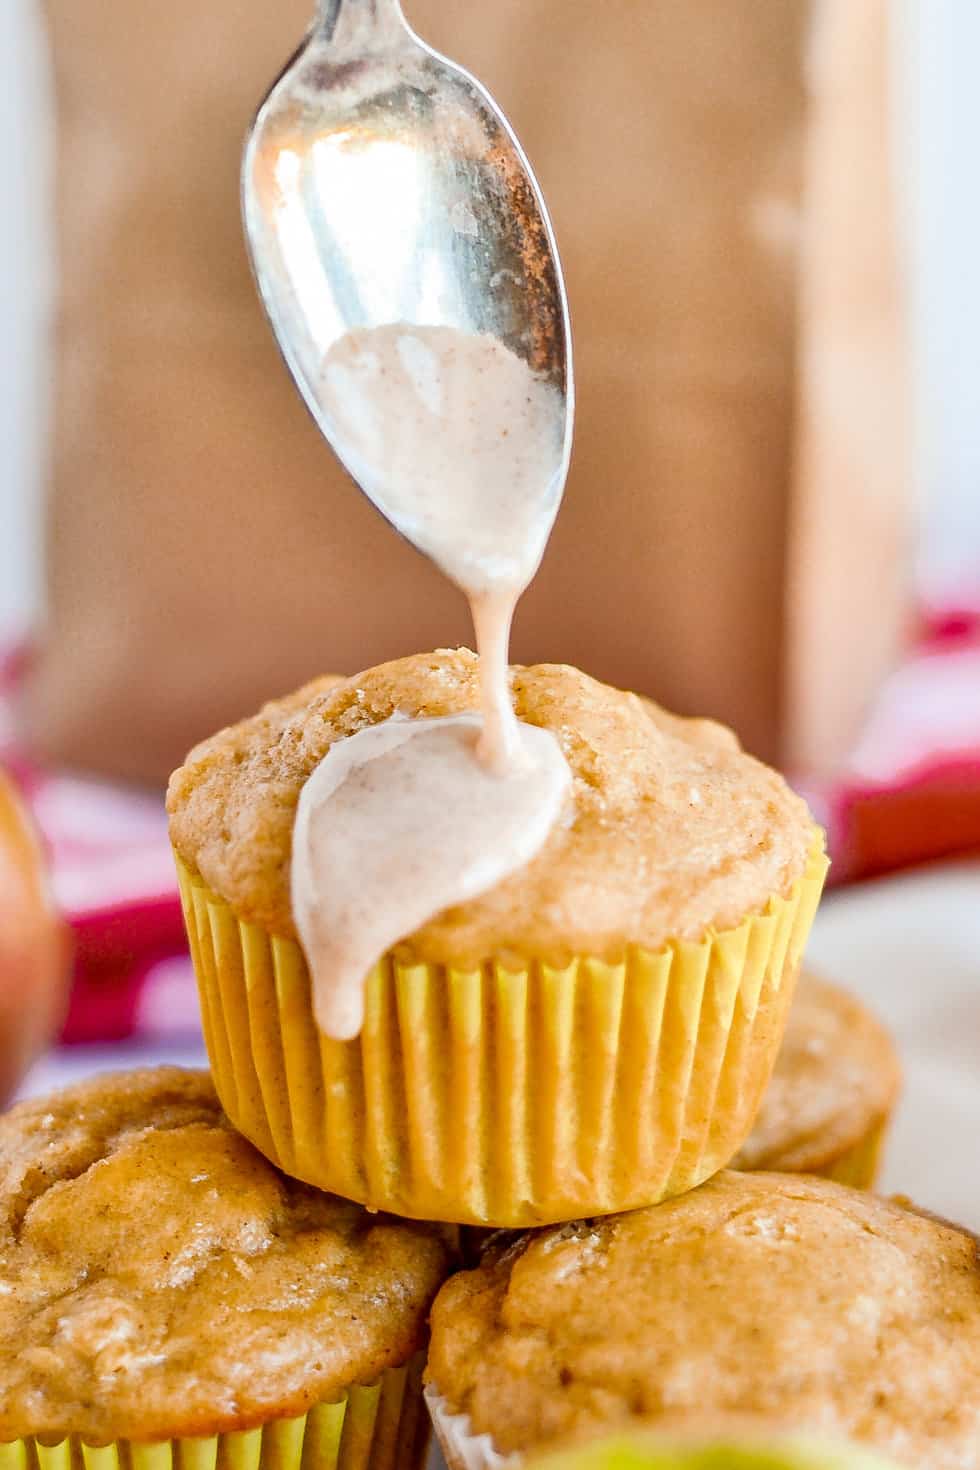 Apple Muffin with cinnamon glaze being poured over it.